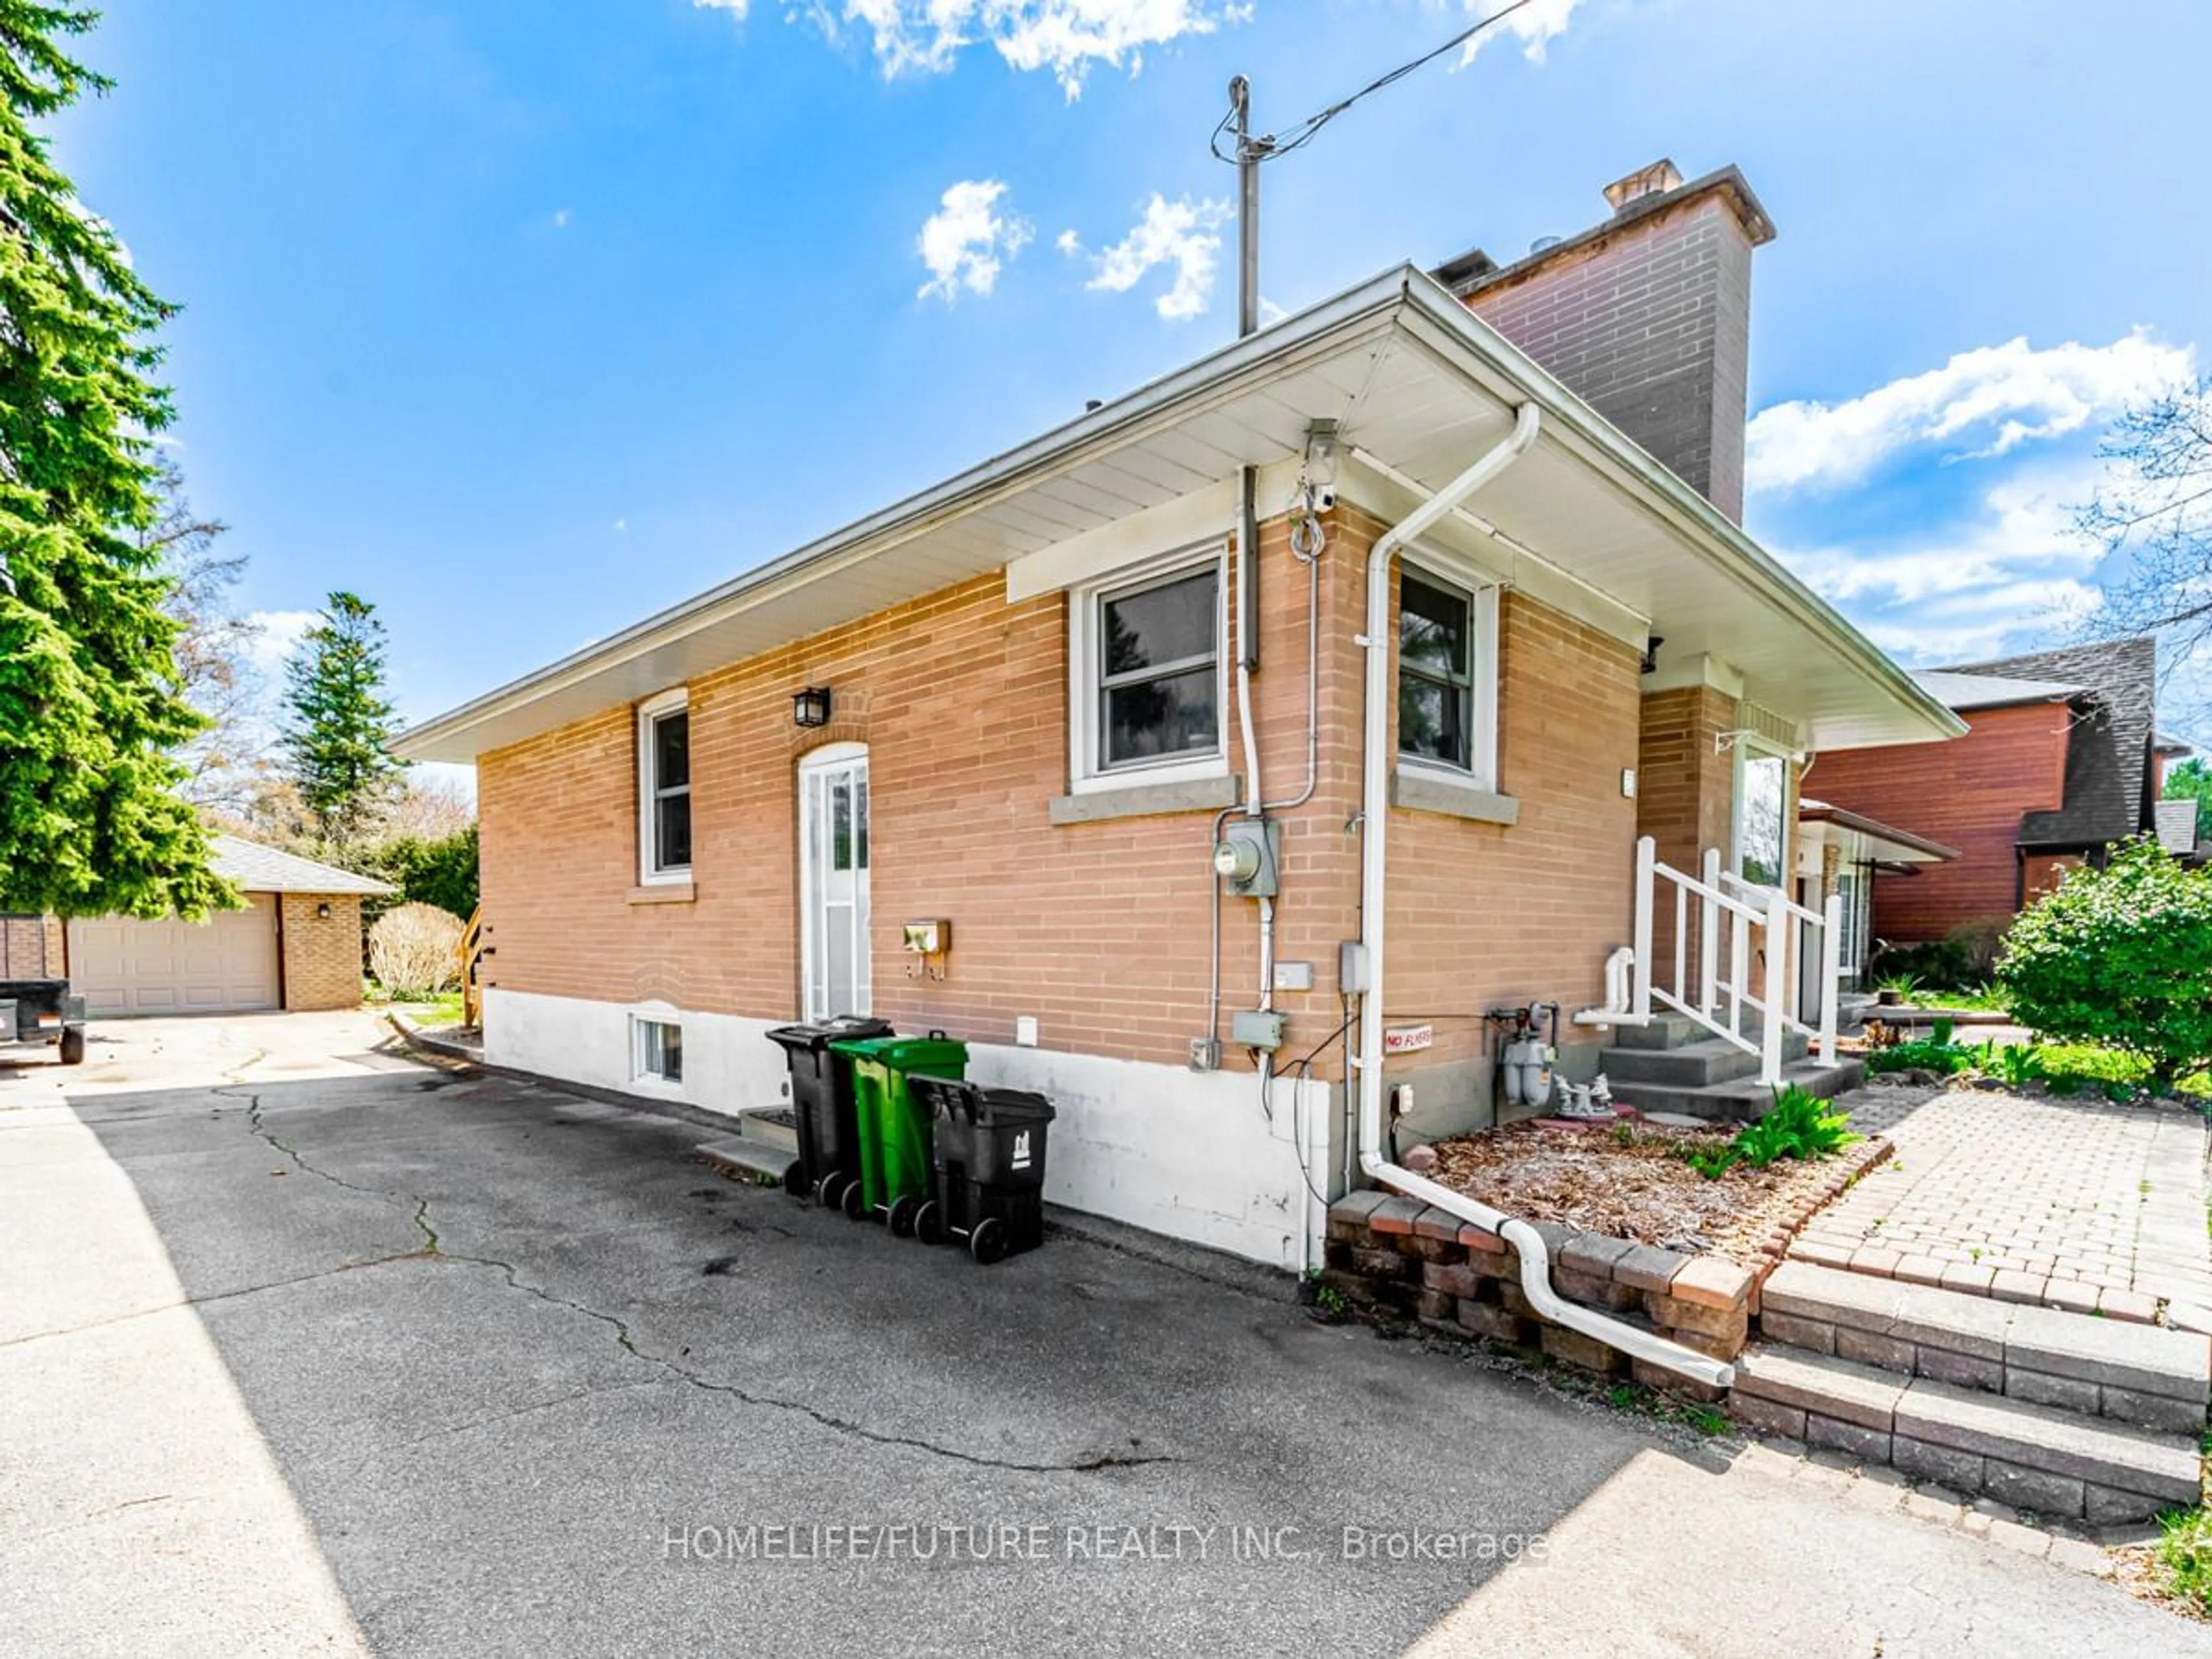 Frontside or backside of a home for 23 Cedarview Dr, Toronto Ontario M1C 2K5